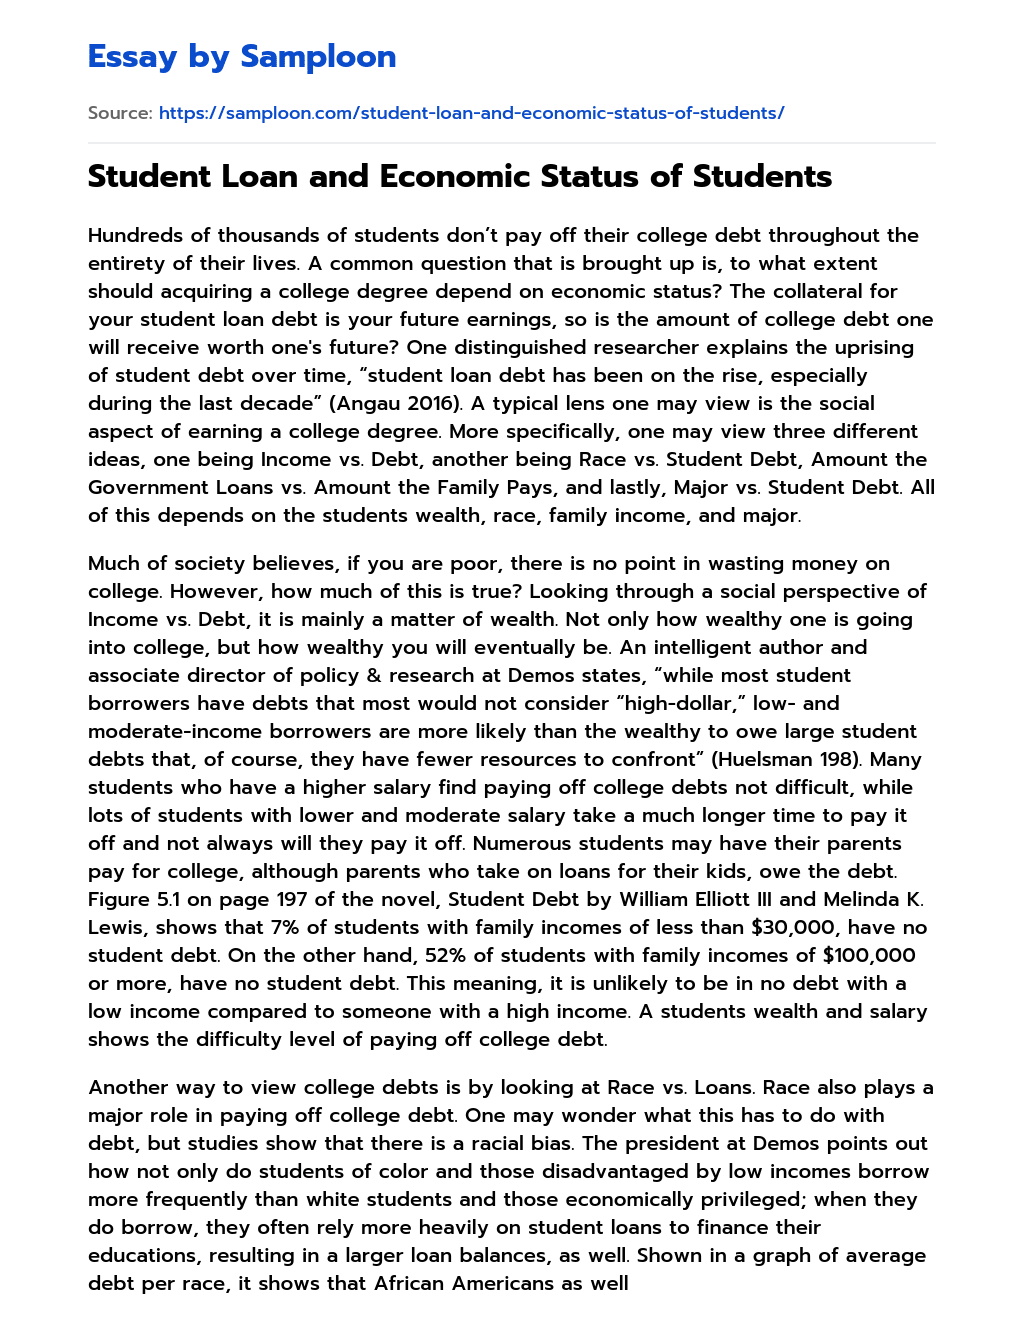 thesis statement about student loan debt